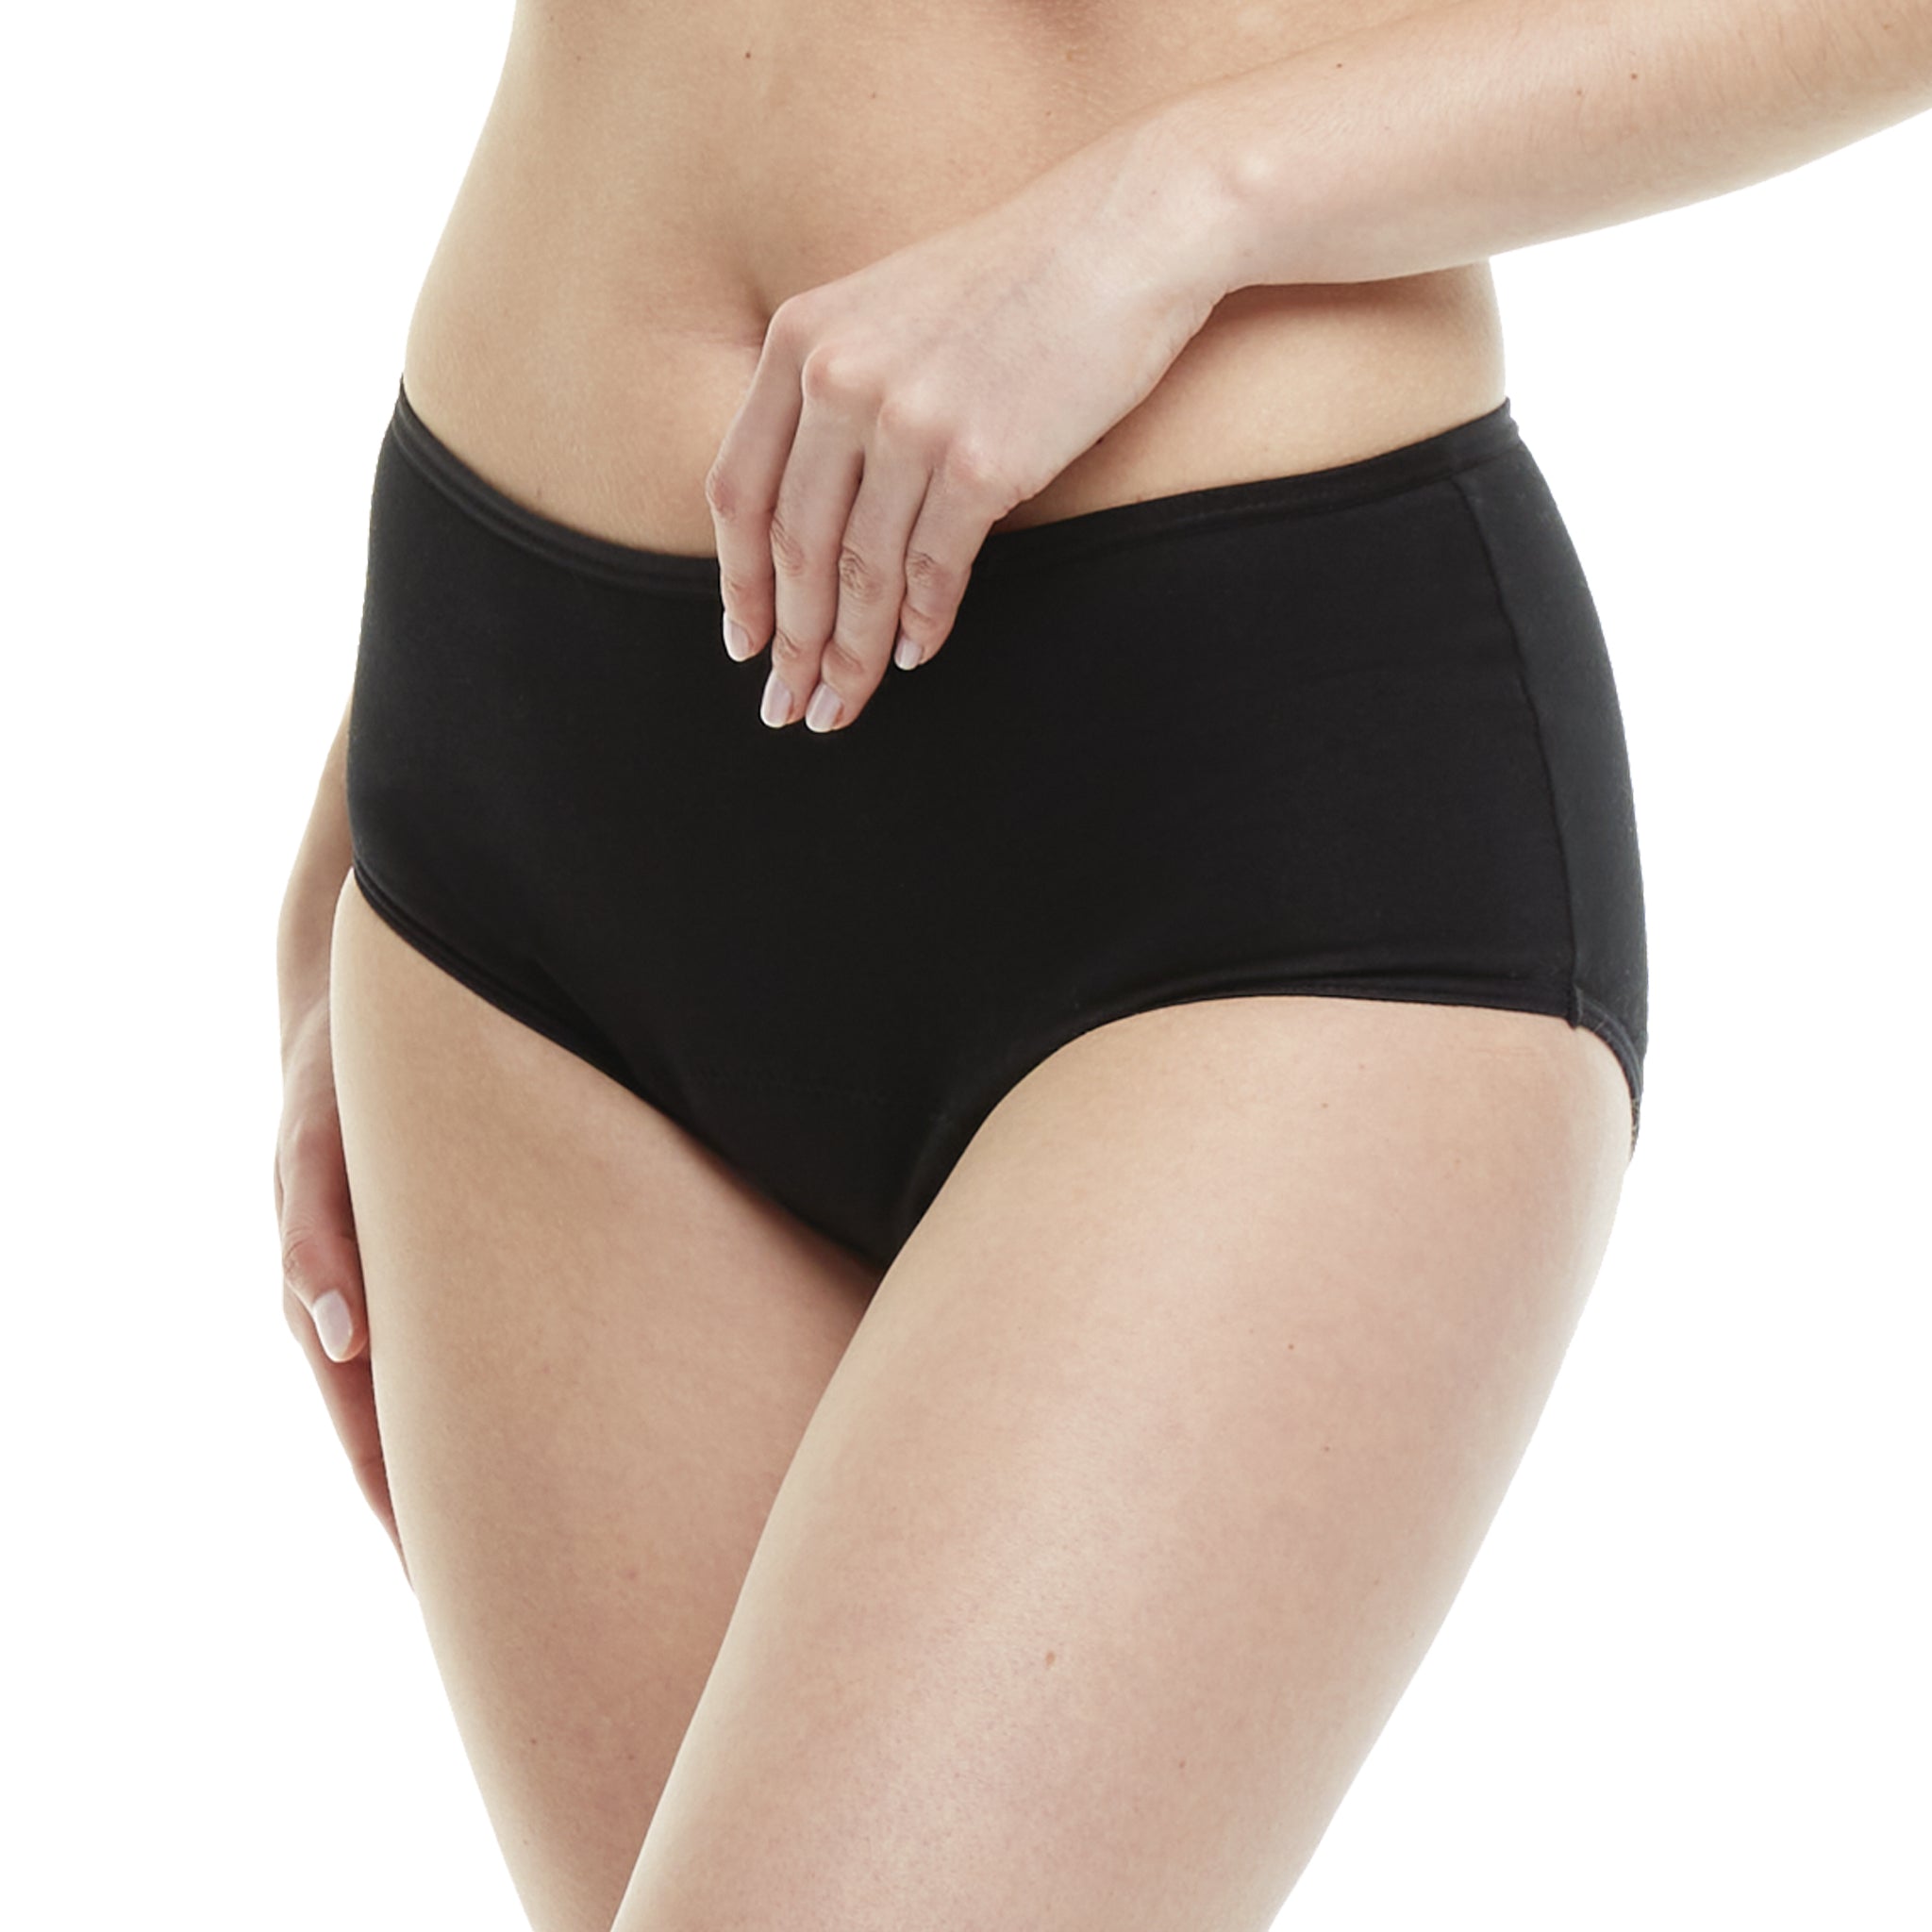 Leakproof Dual Action Underwear - 2 in 1 Incontinence and Period